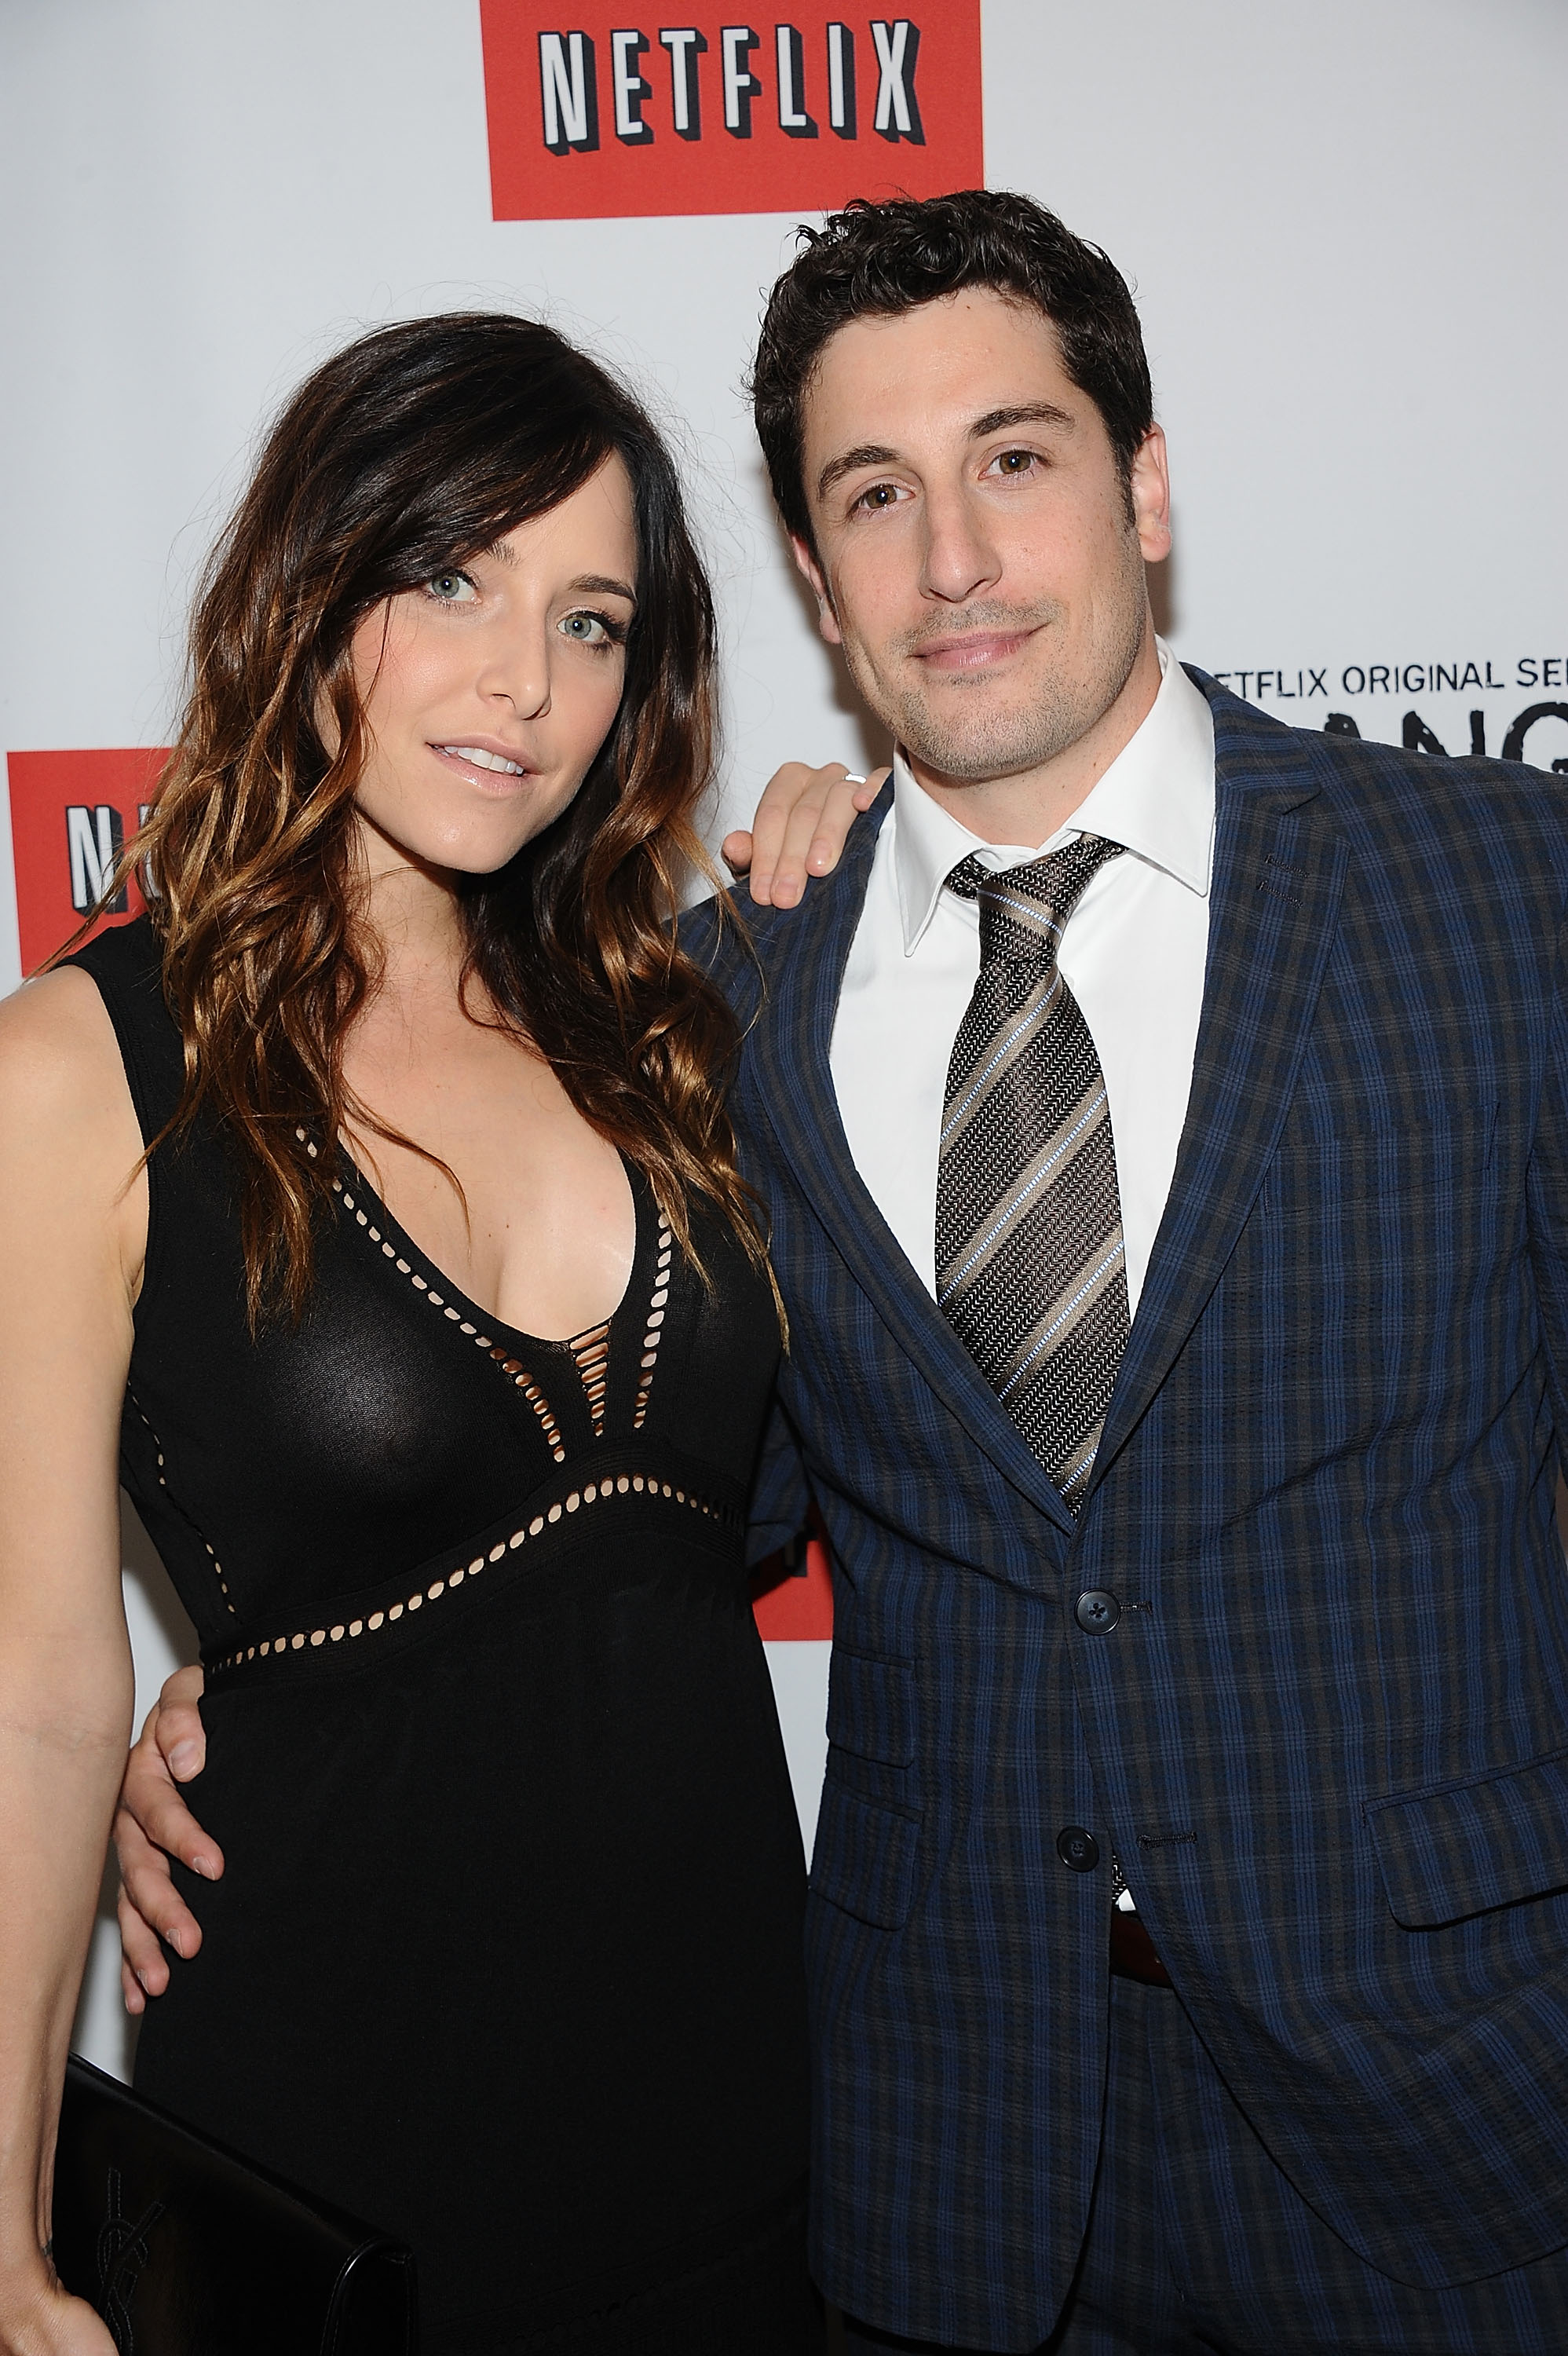 NEW YORK, NY - JUNE 25:  Actors Jenny Mollen (L) and Jason Biggs attend 'Orange Is The New Black' New York Premiere at The New York Botanical Garden on June 25, 2013 in New York City.  (Photo by Gary Gershoff/WireImage) (Gary Gershoff&mdash;WireImage)